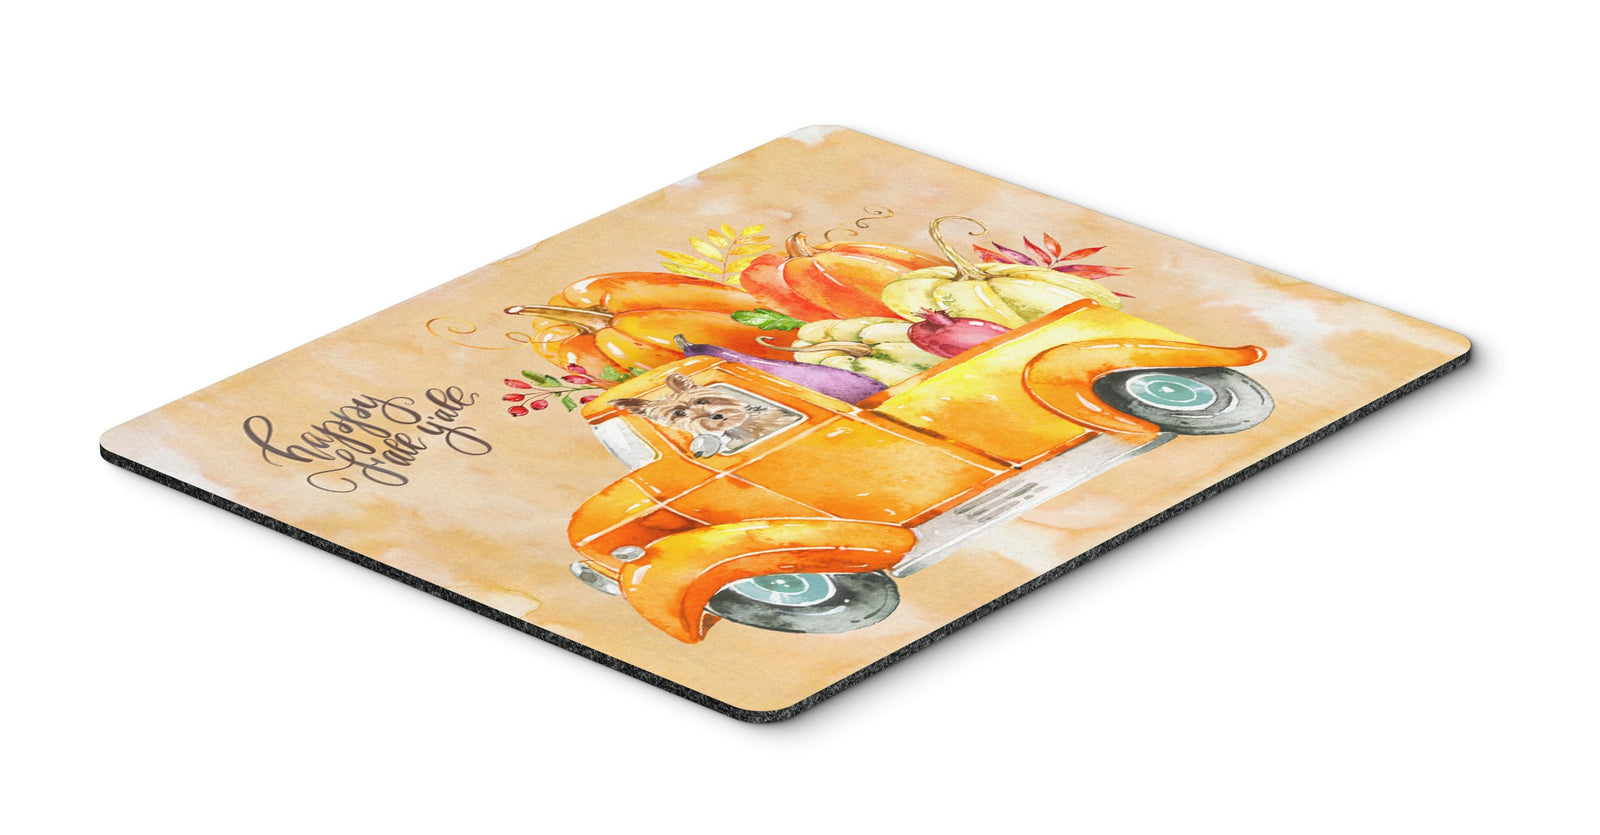 Fall Harvest Yorkshire Terrier Mouse Pad, Hot Pad or Trivet CK2643MP by Caroline's Treasures